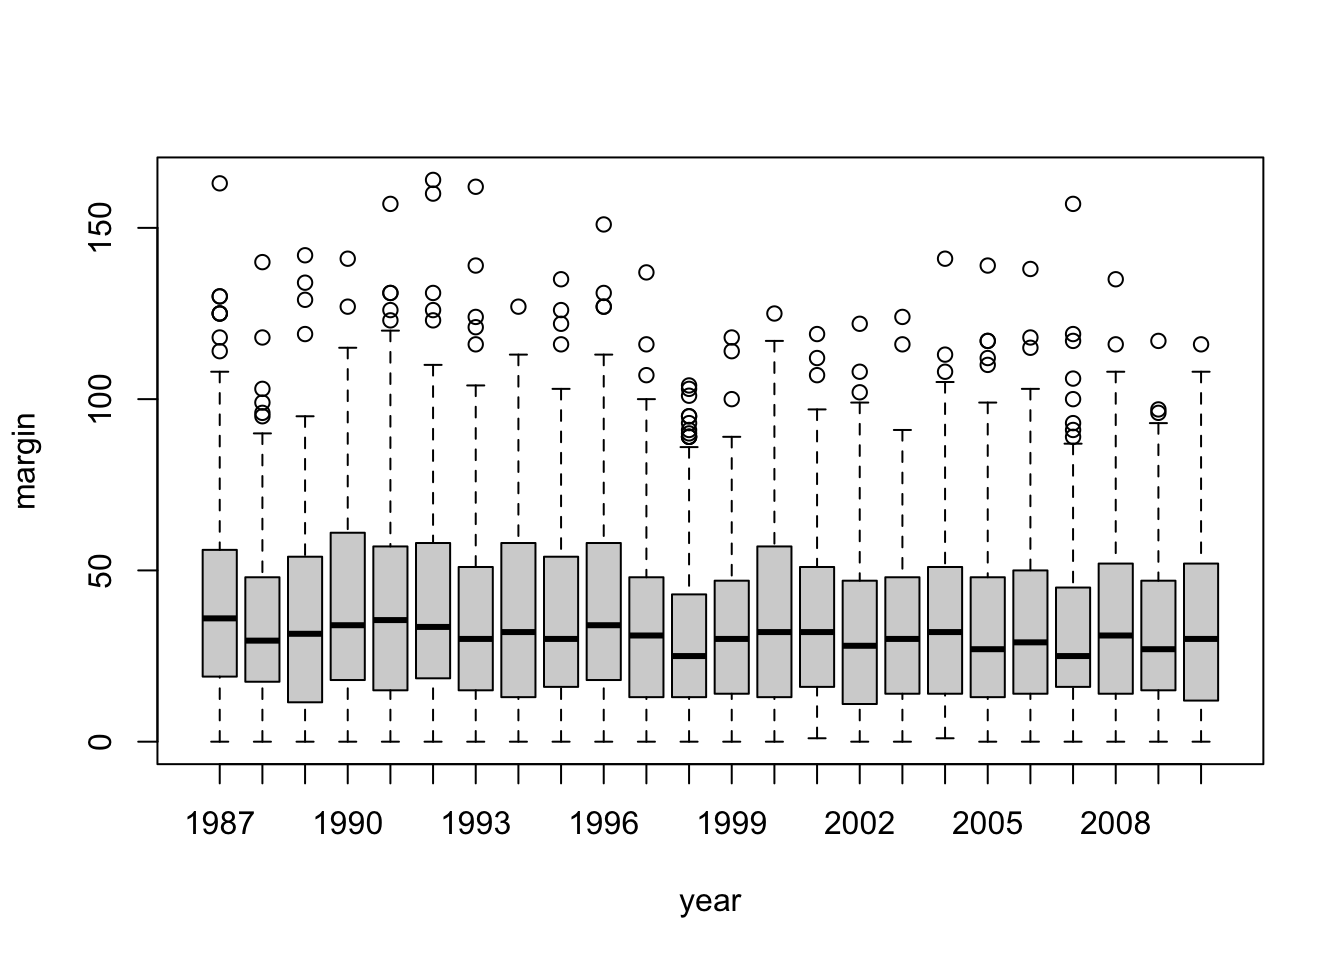 Boxplots showing the AFL winning margins for the 24 years from 1987 to 2010 inclusive. This is the default plot created by R, with no annotations added and no changes to the visual design. It's pretty readable, though at a minimum you'd want to include some basic annotations labelling the axes. Compare and contrast with Figure \@ref(fig:multipleboxplots2)